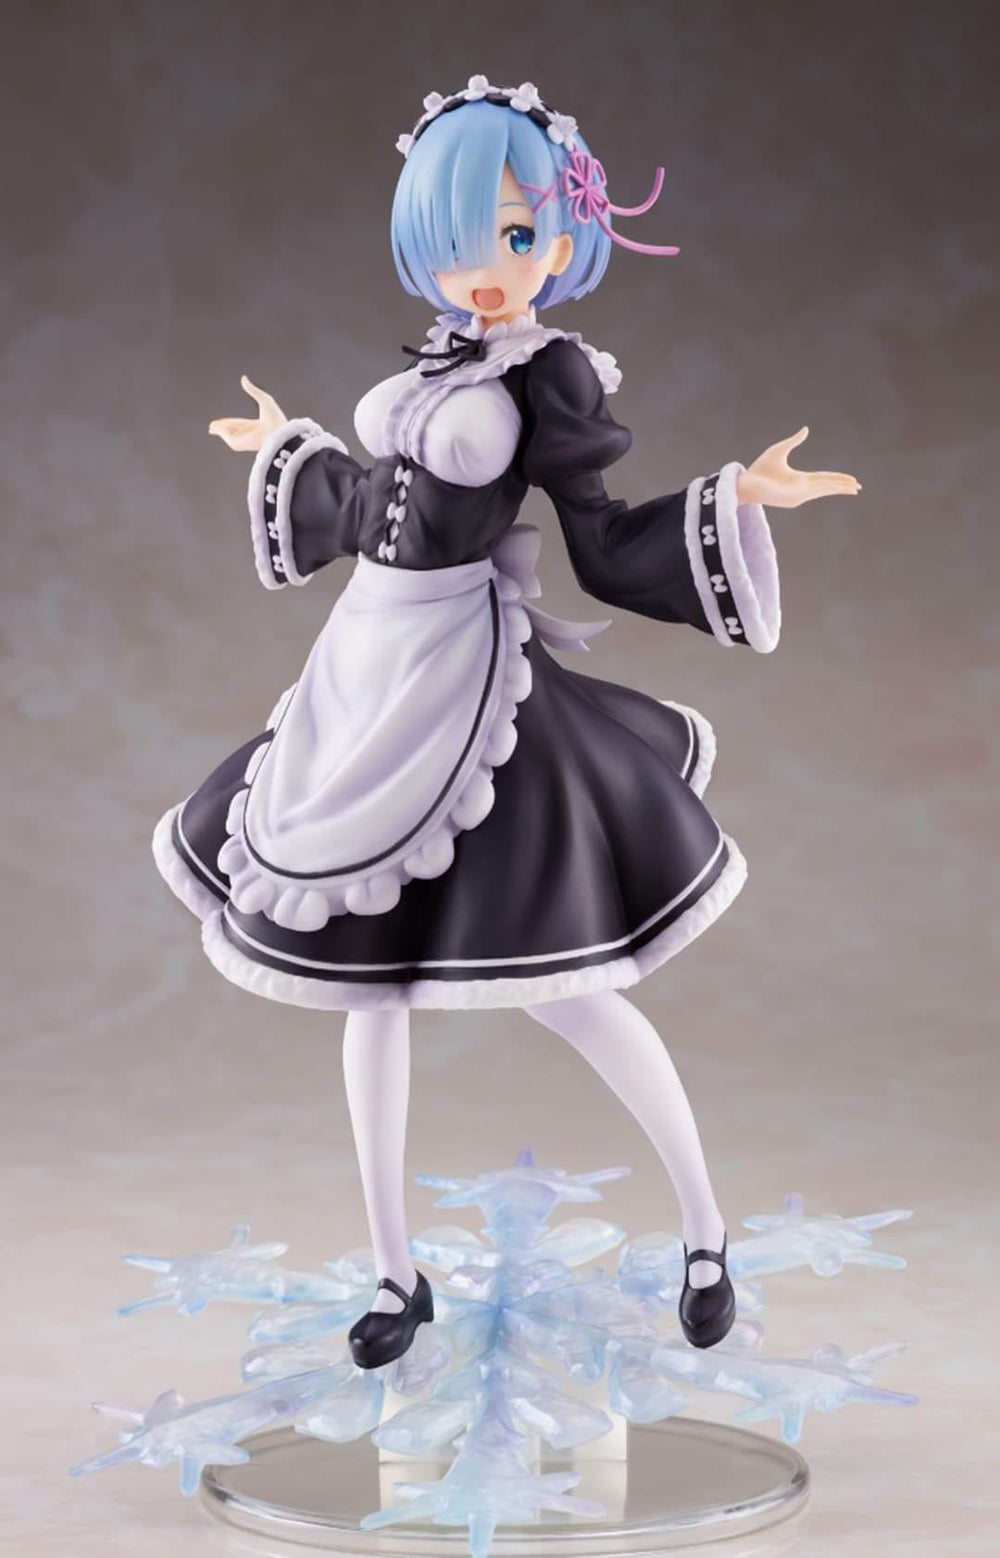 PREORDER Re:Zero Starting Life in Another World AMP Figure - Rem (Winter Maid Image Ver.)